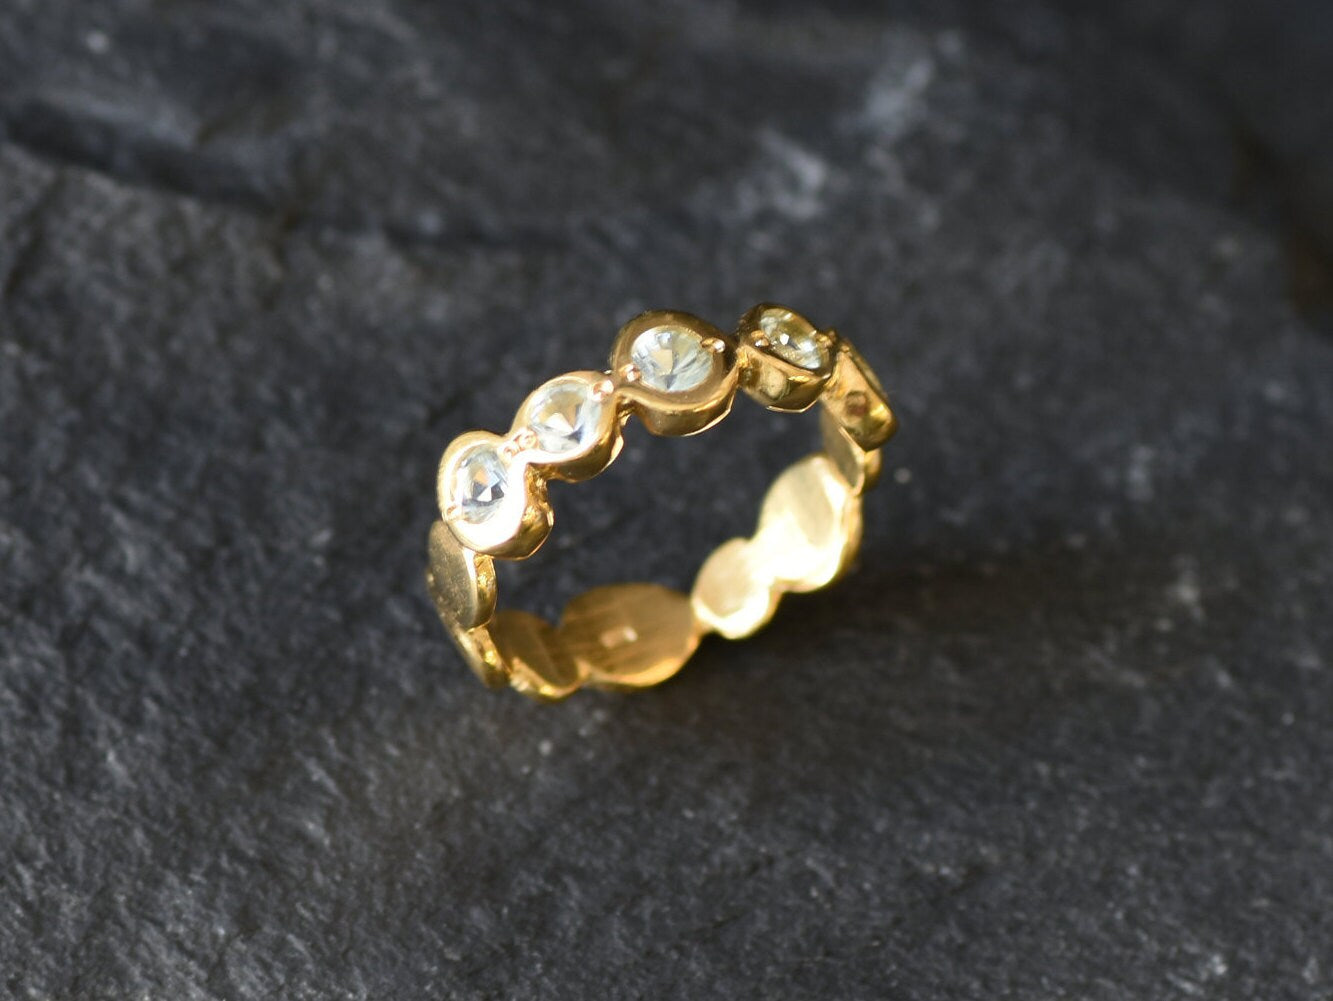 Gold Blue Topaz Ring, Gold Bubble Ring, Topaz Band, December Birthstone, Gold Sparkly Ring, Blue Sparkly Ring, Gold Plated Ring,Vermeil Ring